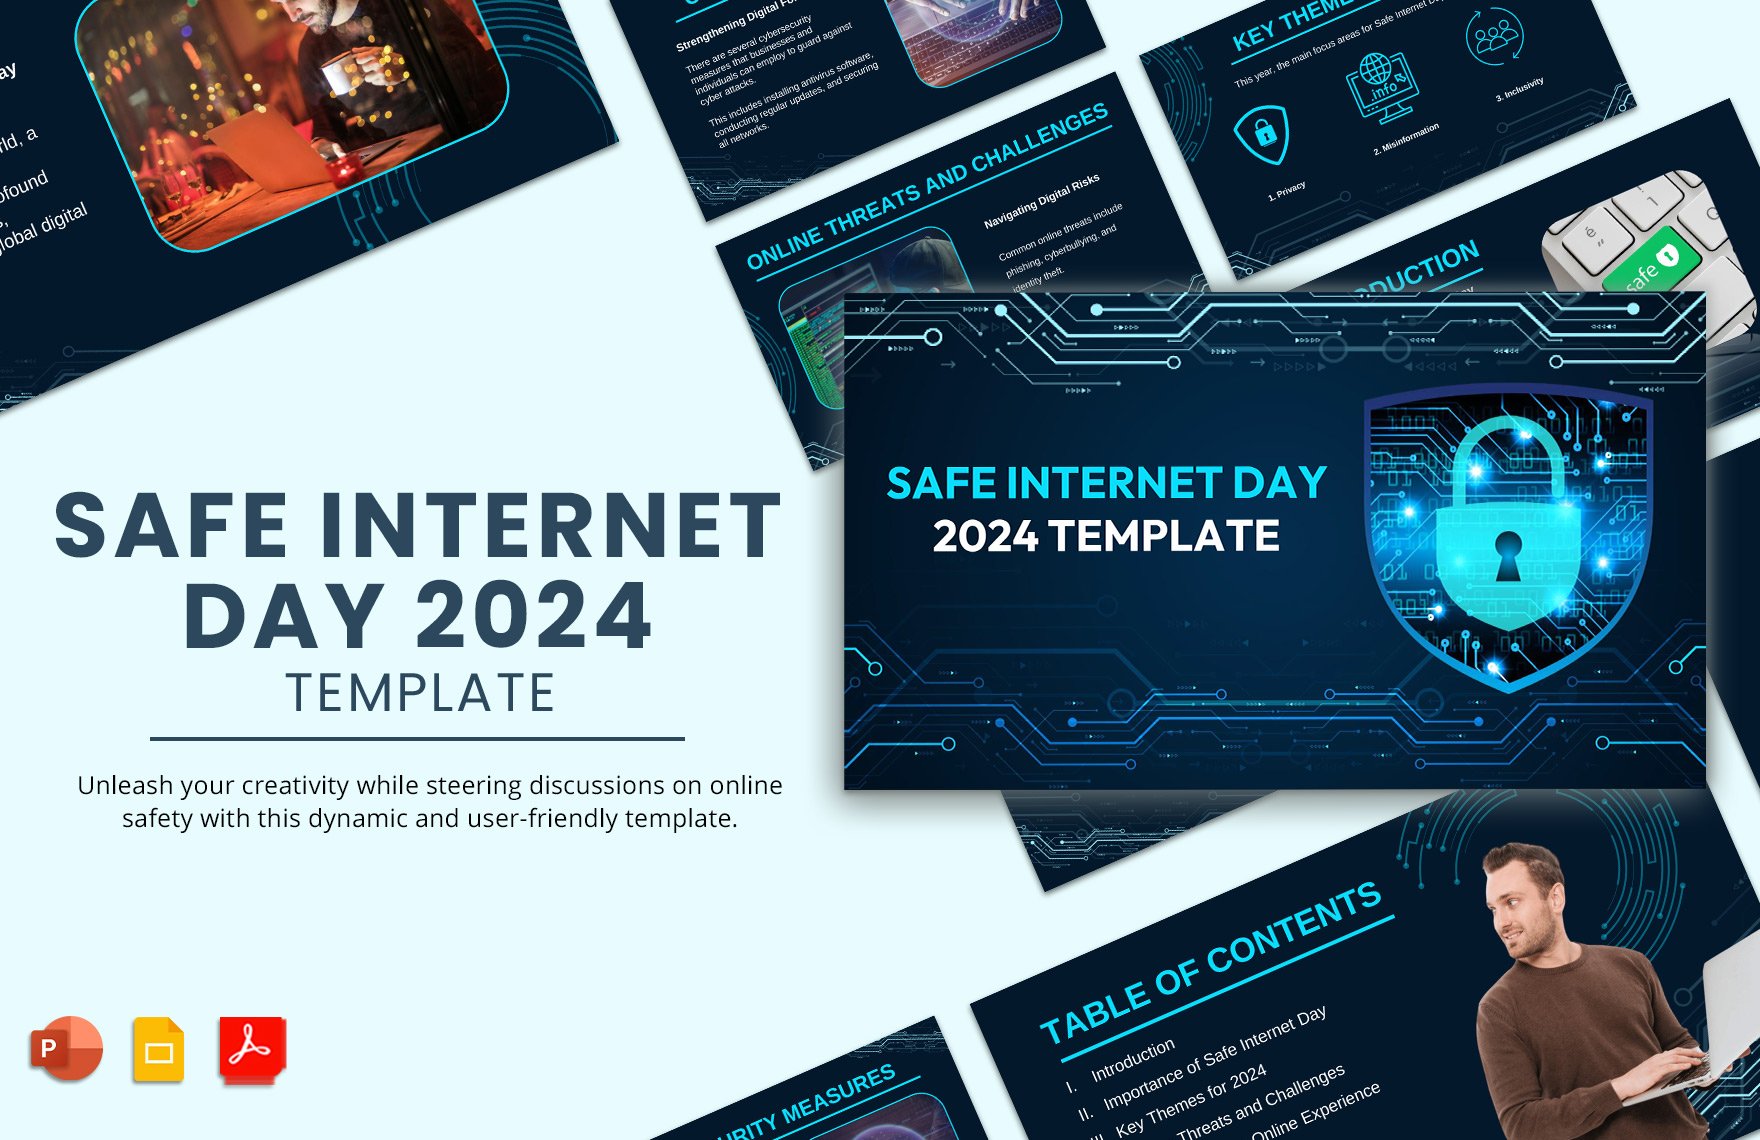 Safe Internet Day 2024 Template